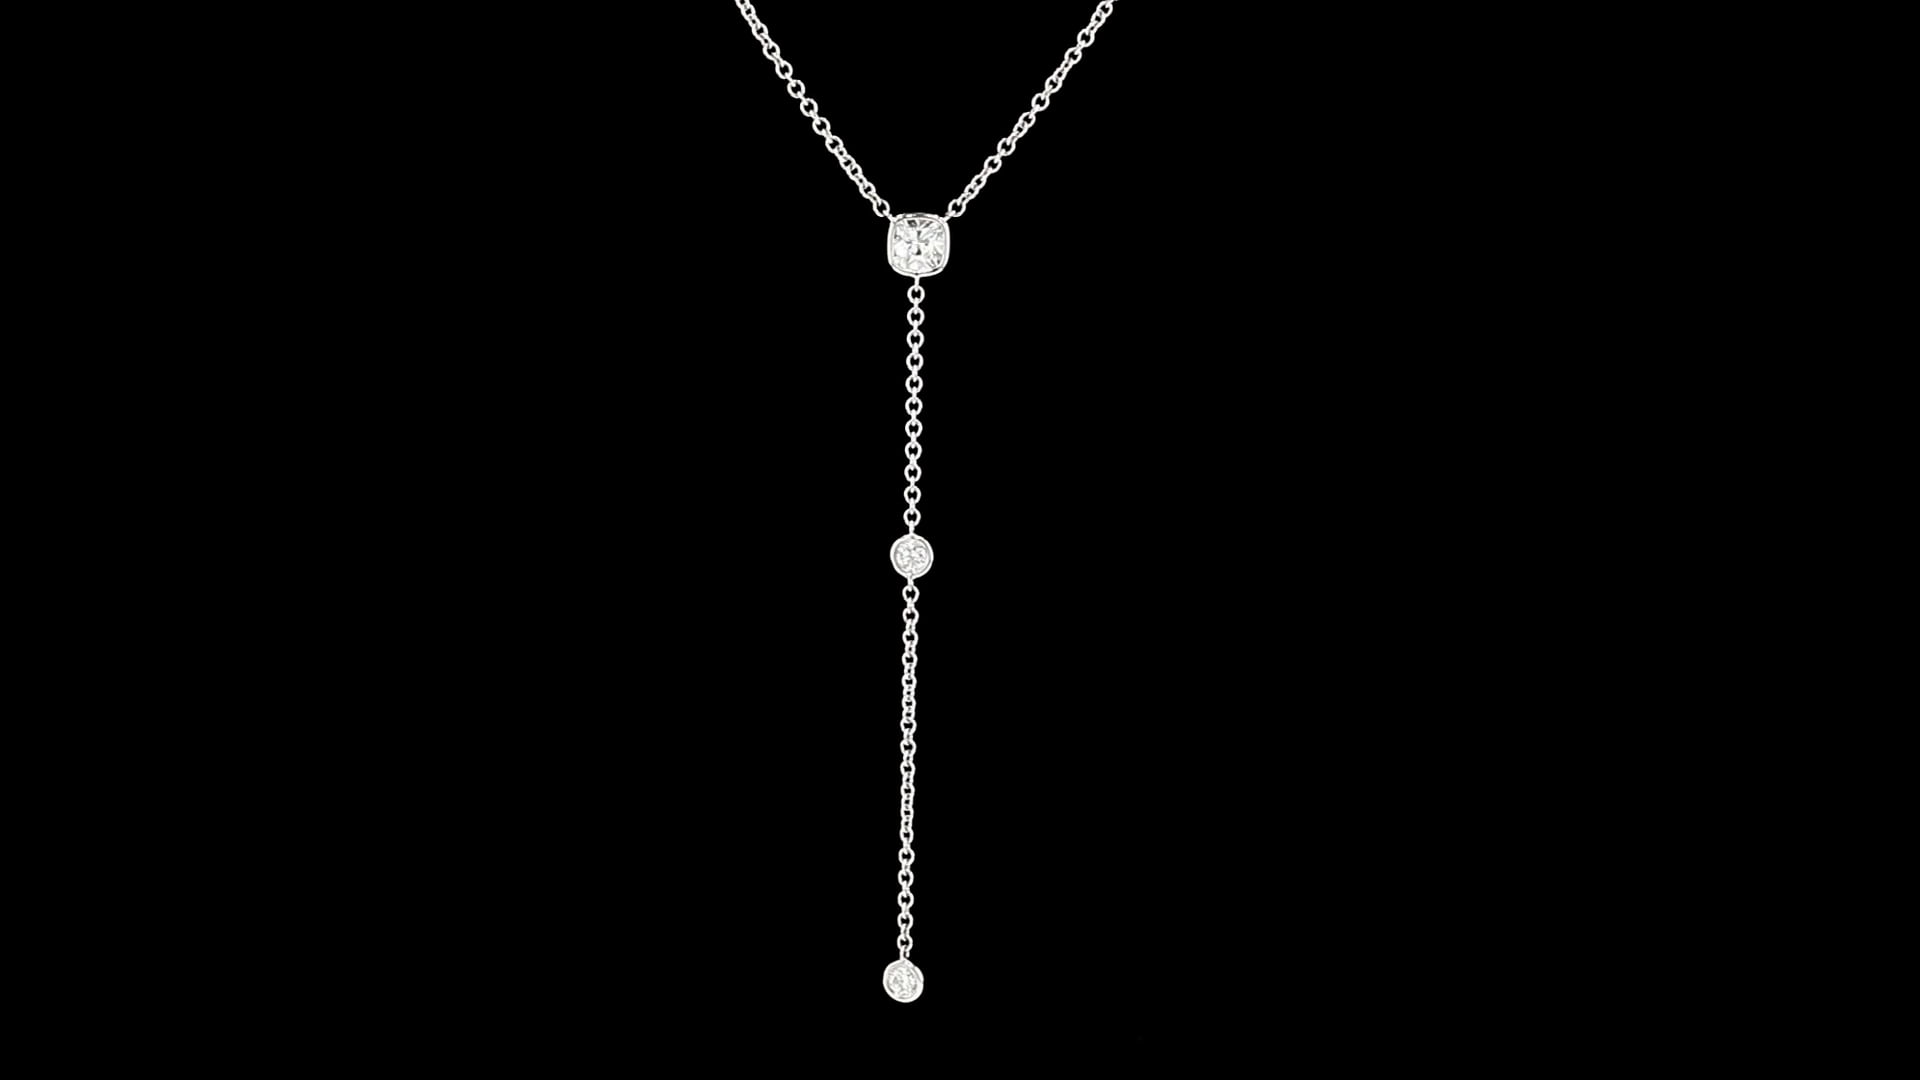 1 Ct Cross Pendant Necklace Simulated Diamond 14K Solid White Gold-Plated  Silver | eBay